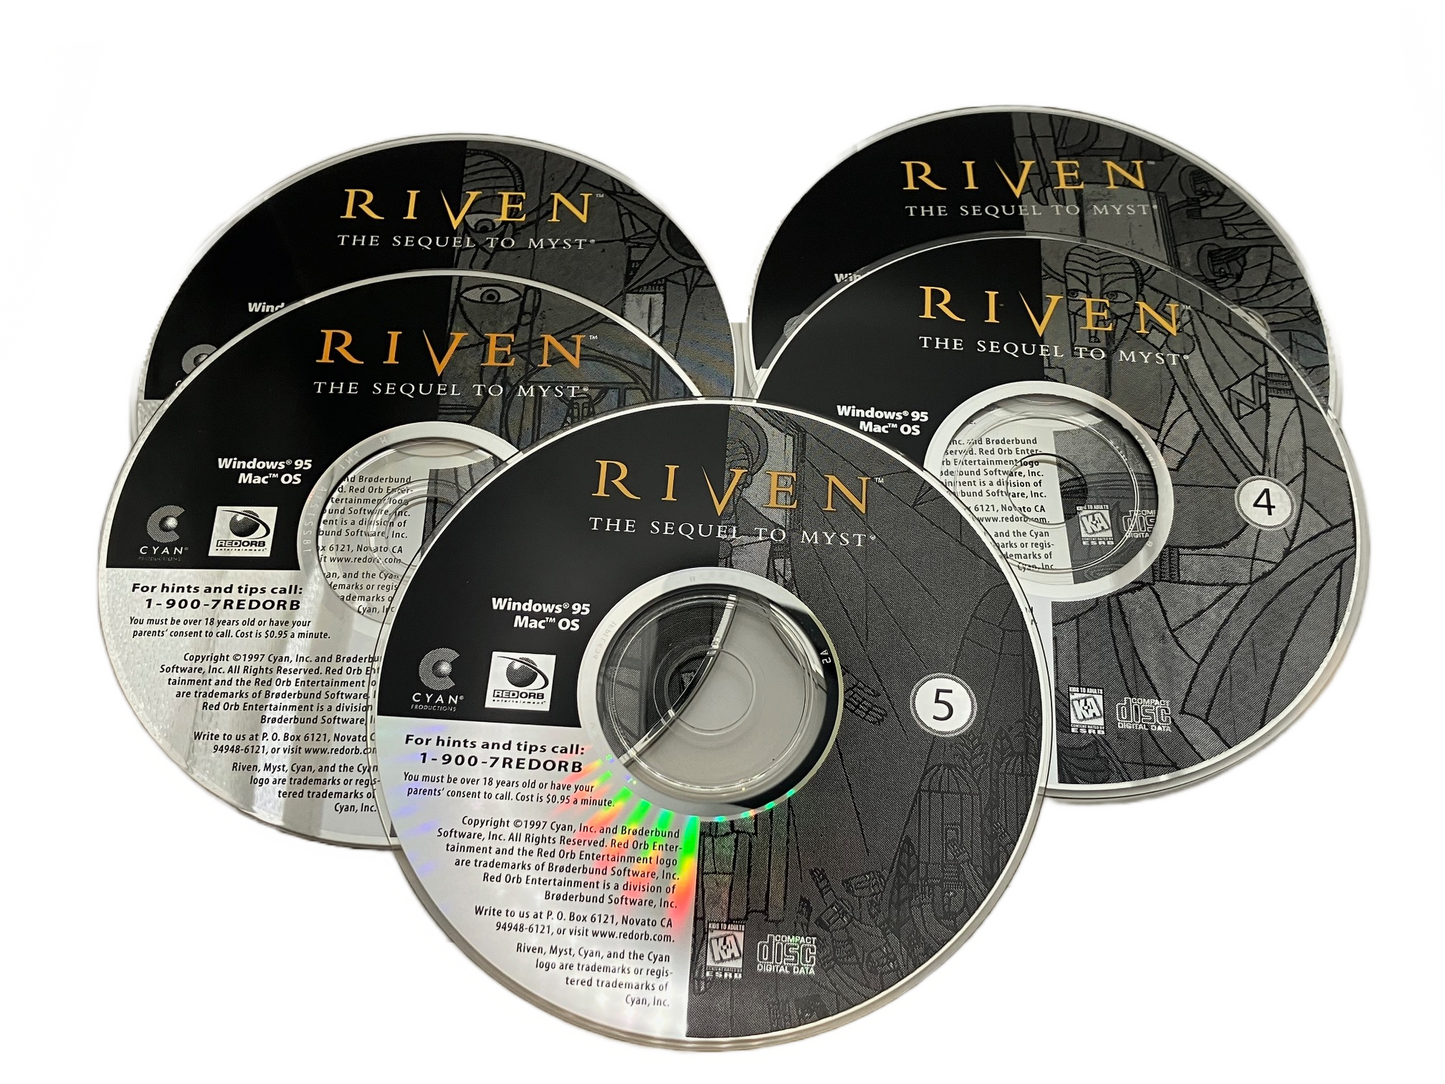 Riven The Sequel To Myst PC CD Rom Game.